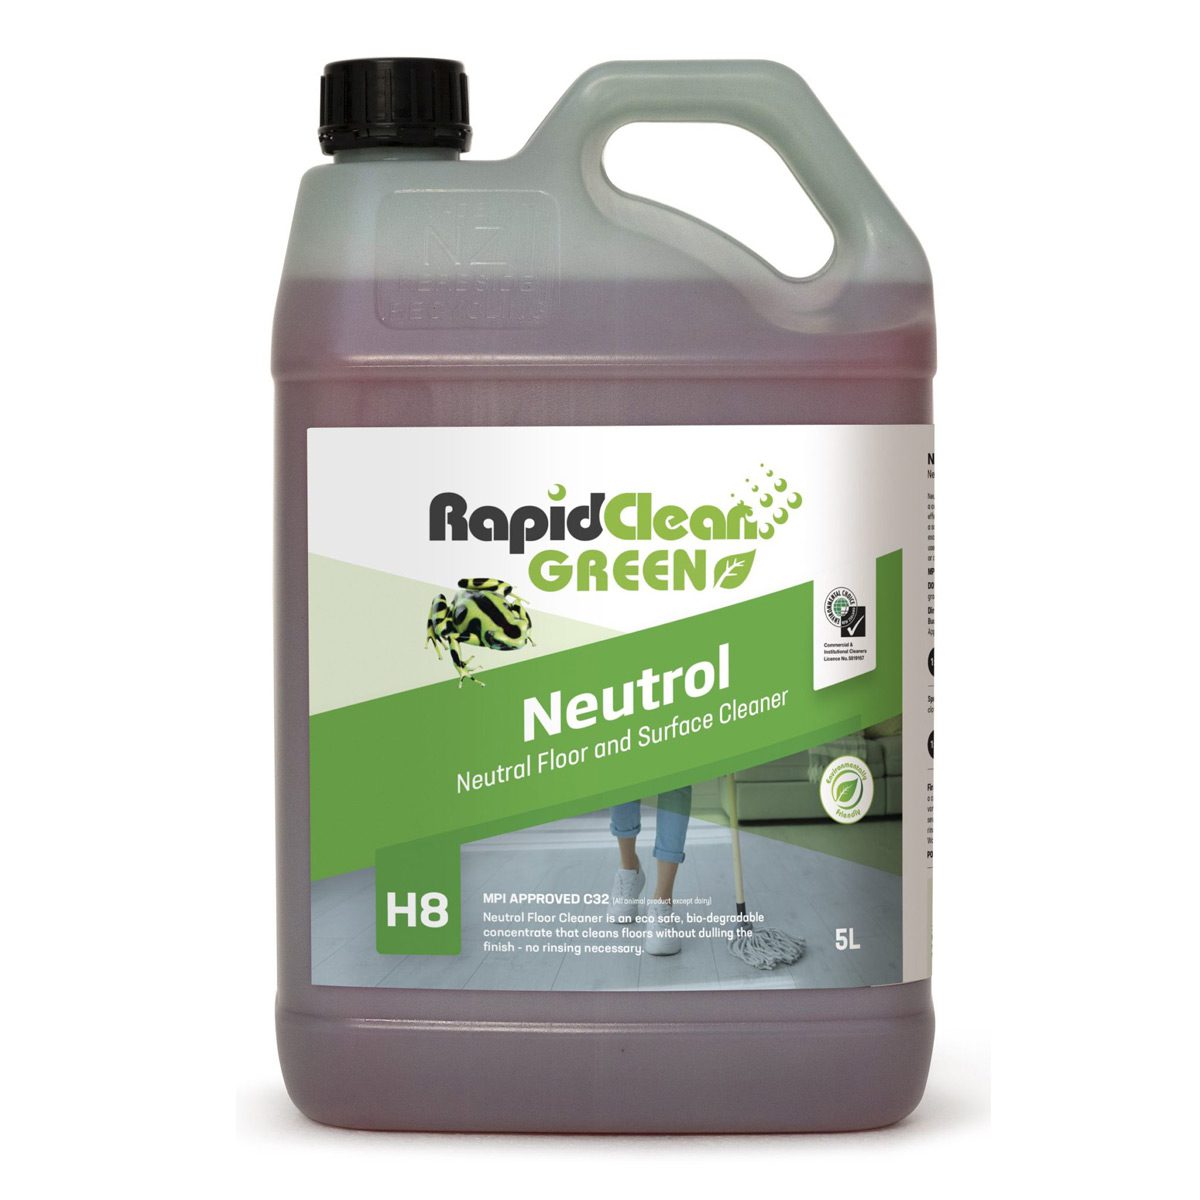 cleaning-products-floorcare-rapidclean-neutrol-floor-and-surface-cleaner-5L-litre-low-foaming-detergent-heavy-duty-highly-concentrated-low-foaming-detergent-vjs-distributors-RAP140380